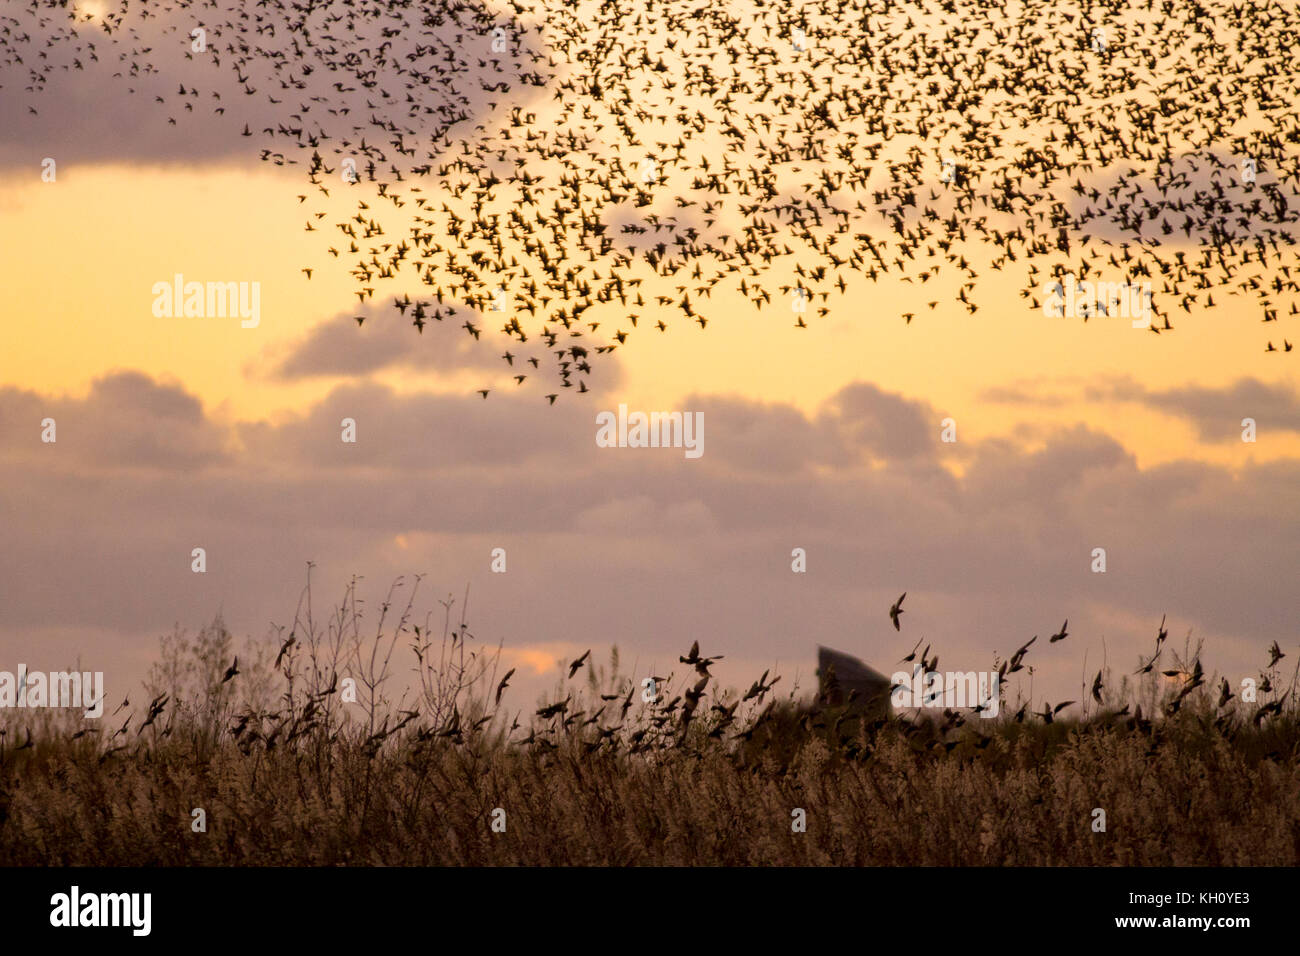 Burscough, Merseyside, UK Weather 12th November, 2017. Spectacular Starling flocks mumurate over Martin Mere nature reserve at sunset as an estimated 50 thousand starlings gather at the onset of a cold winter, and early nights triggers this autumn gathering and groupings. The murmur or chatter, the interaction between the huge numbers as they fly, is quite intense and is thought to form part of a communication of sorts. These huge flocks are the largest seen in the last for 12 years and are attracting large numbers of birdwatchers to the area. Credit. MediaWorldImages/AlamyLiveNews Stock Photo